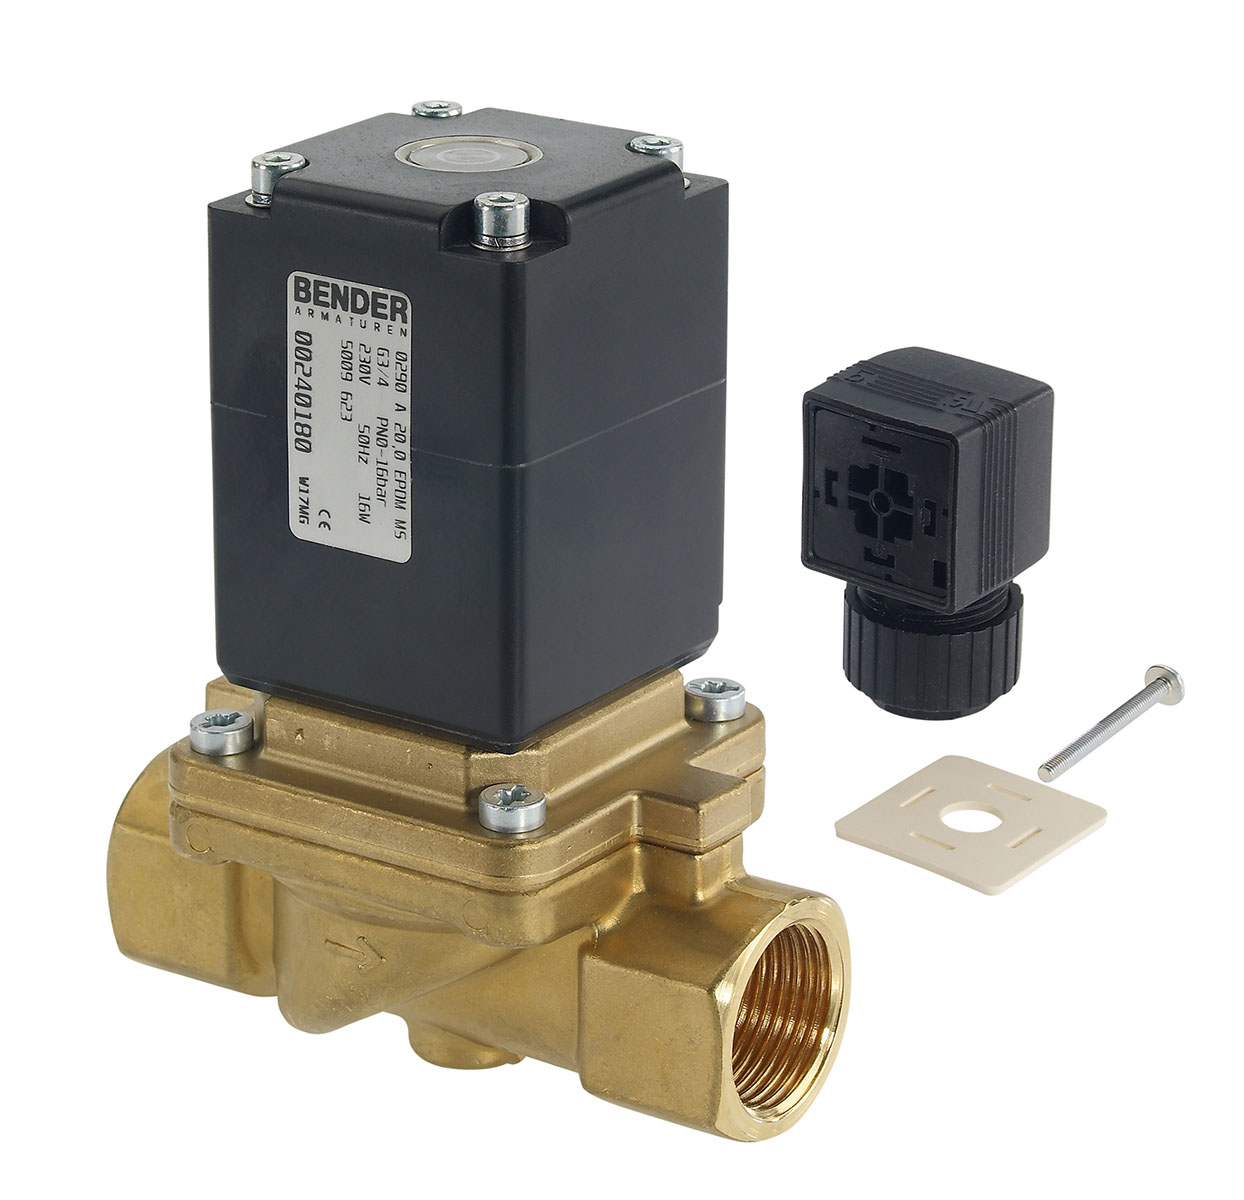 5009633 - 2/2 way solenoid valve normally closed for not flammable gas and fluids Type 6; female thread